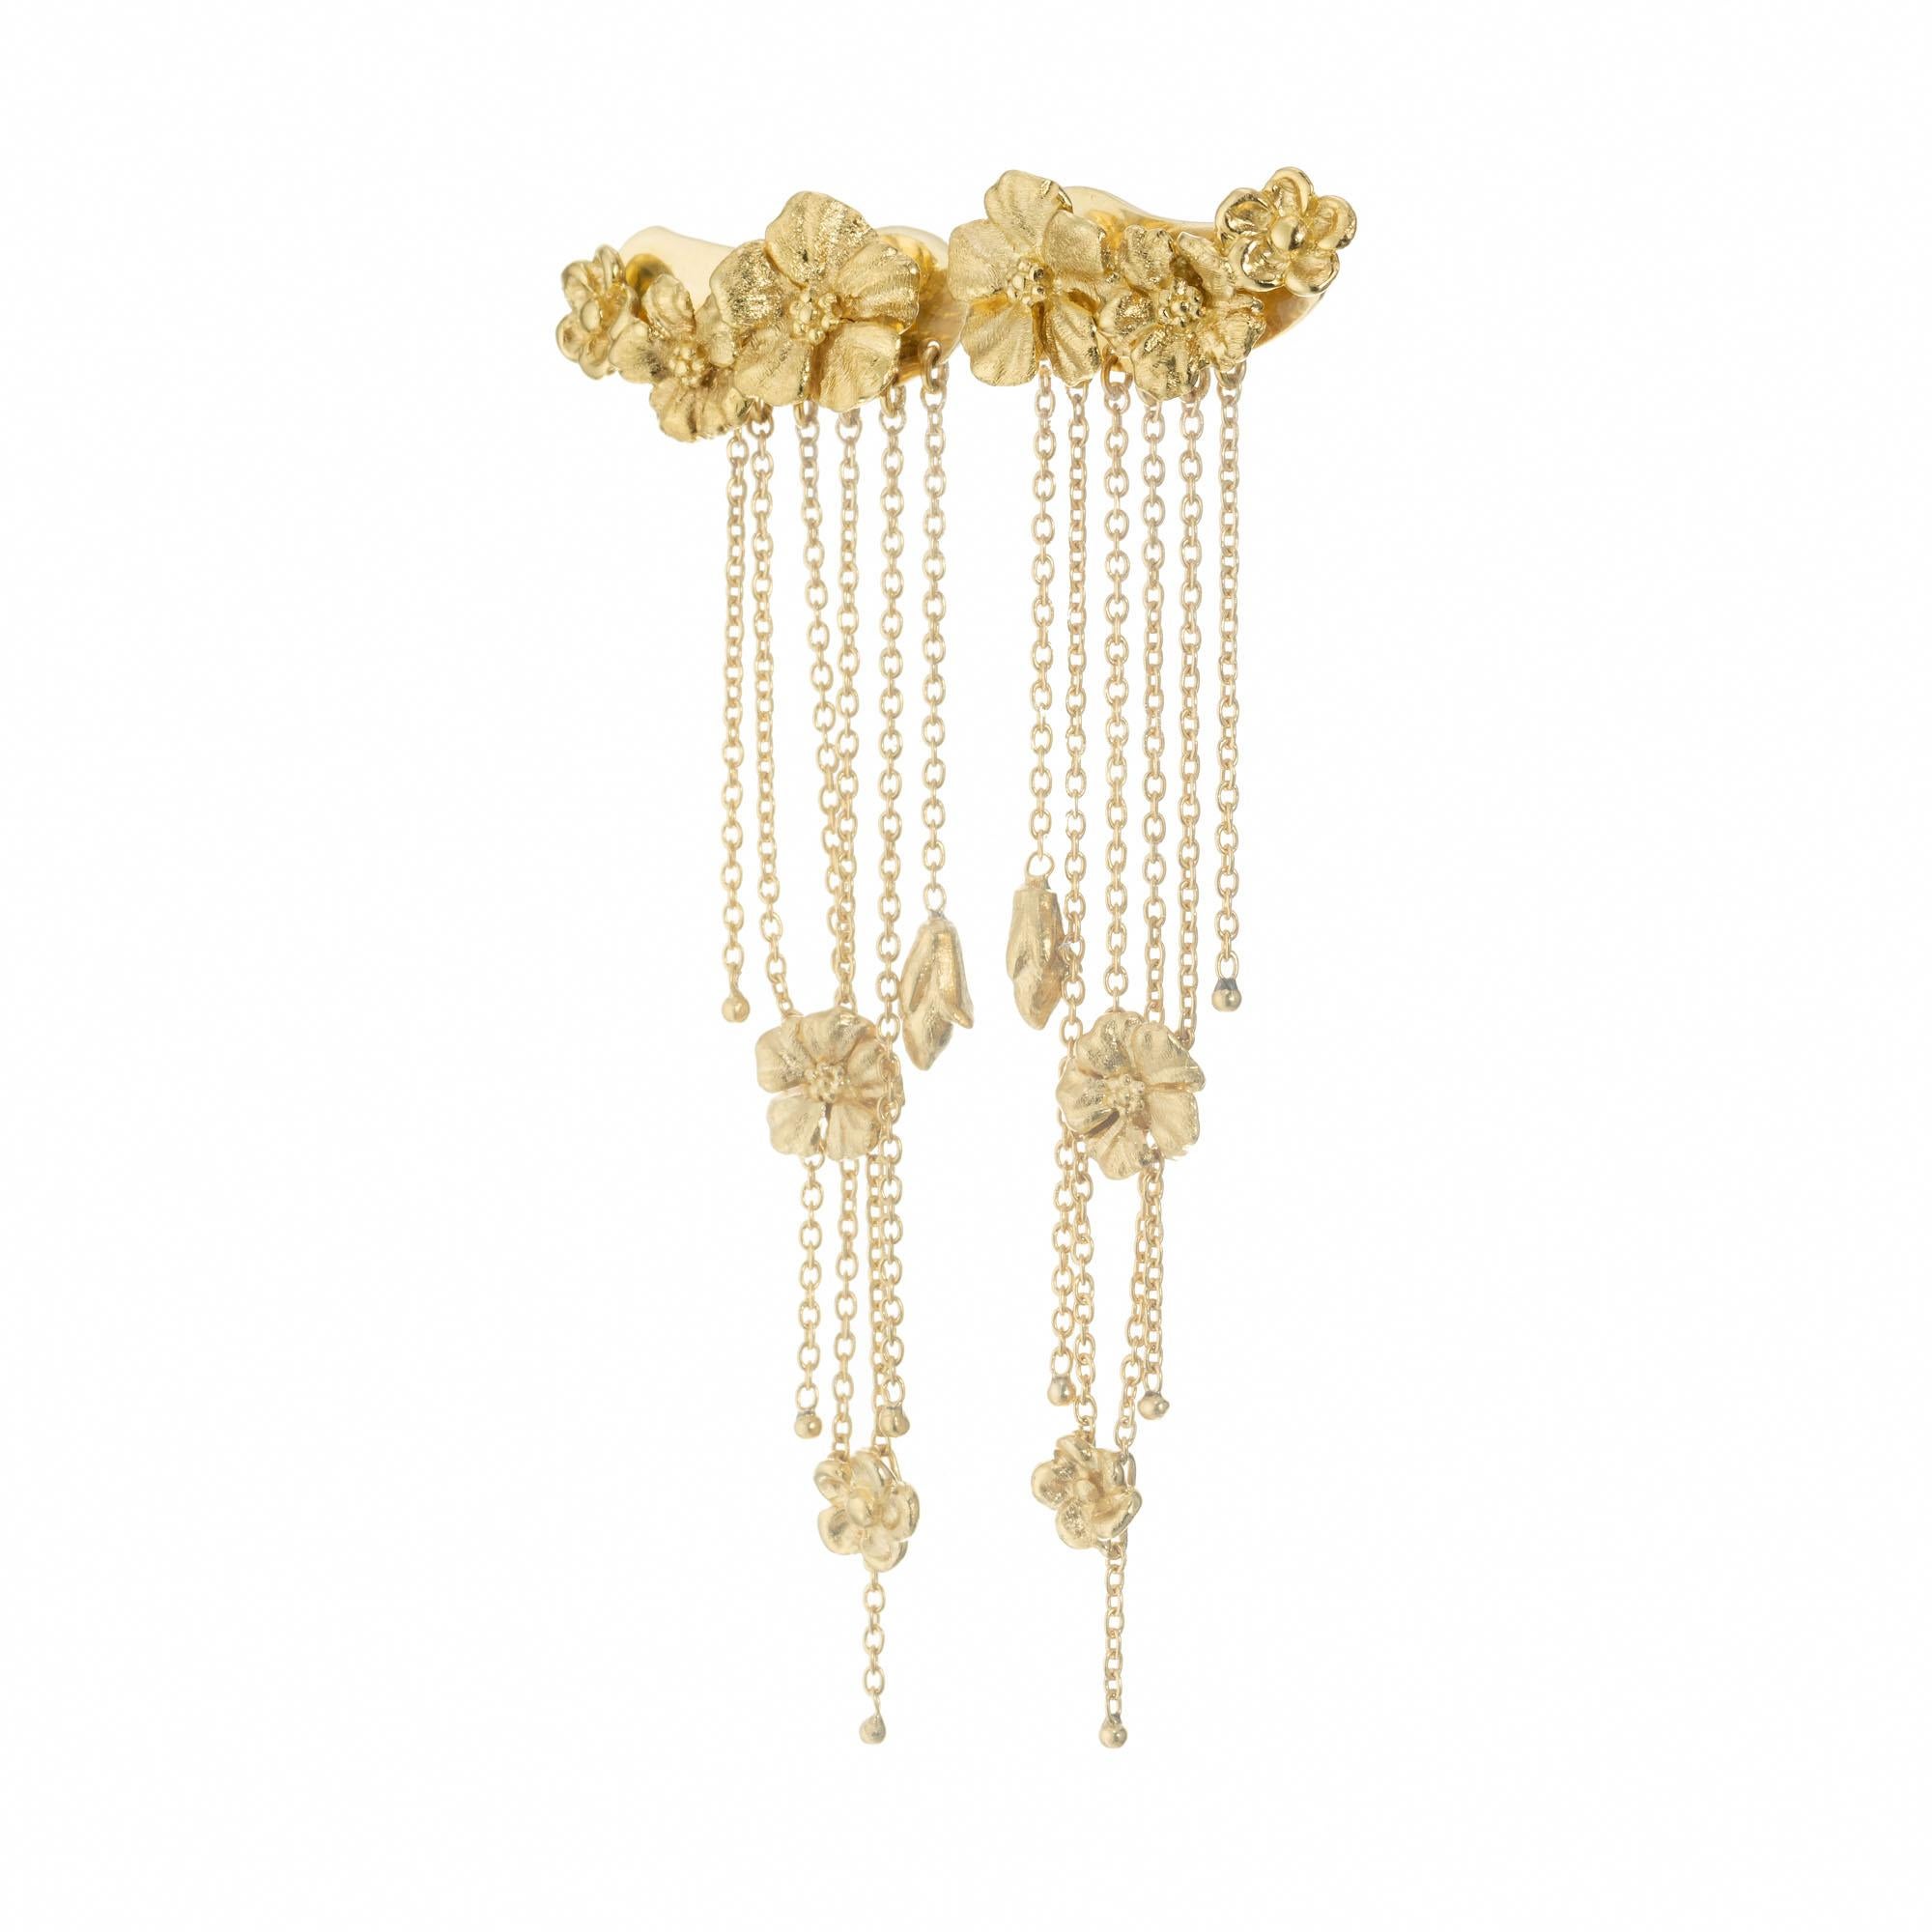 Beautifully designed Telento Italiano tassel dangle earrings. 18k yellow gold flower design with flower tassels. 

Stamped: Talento 
12.1 grams
Front:
Top to bottom: 19.0mm or .75 Inch
Width: 13mm or .5 Inch
Depth or thickness: 1.6mm
Back:
Top to